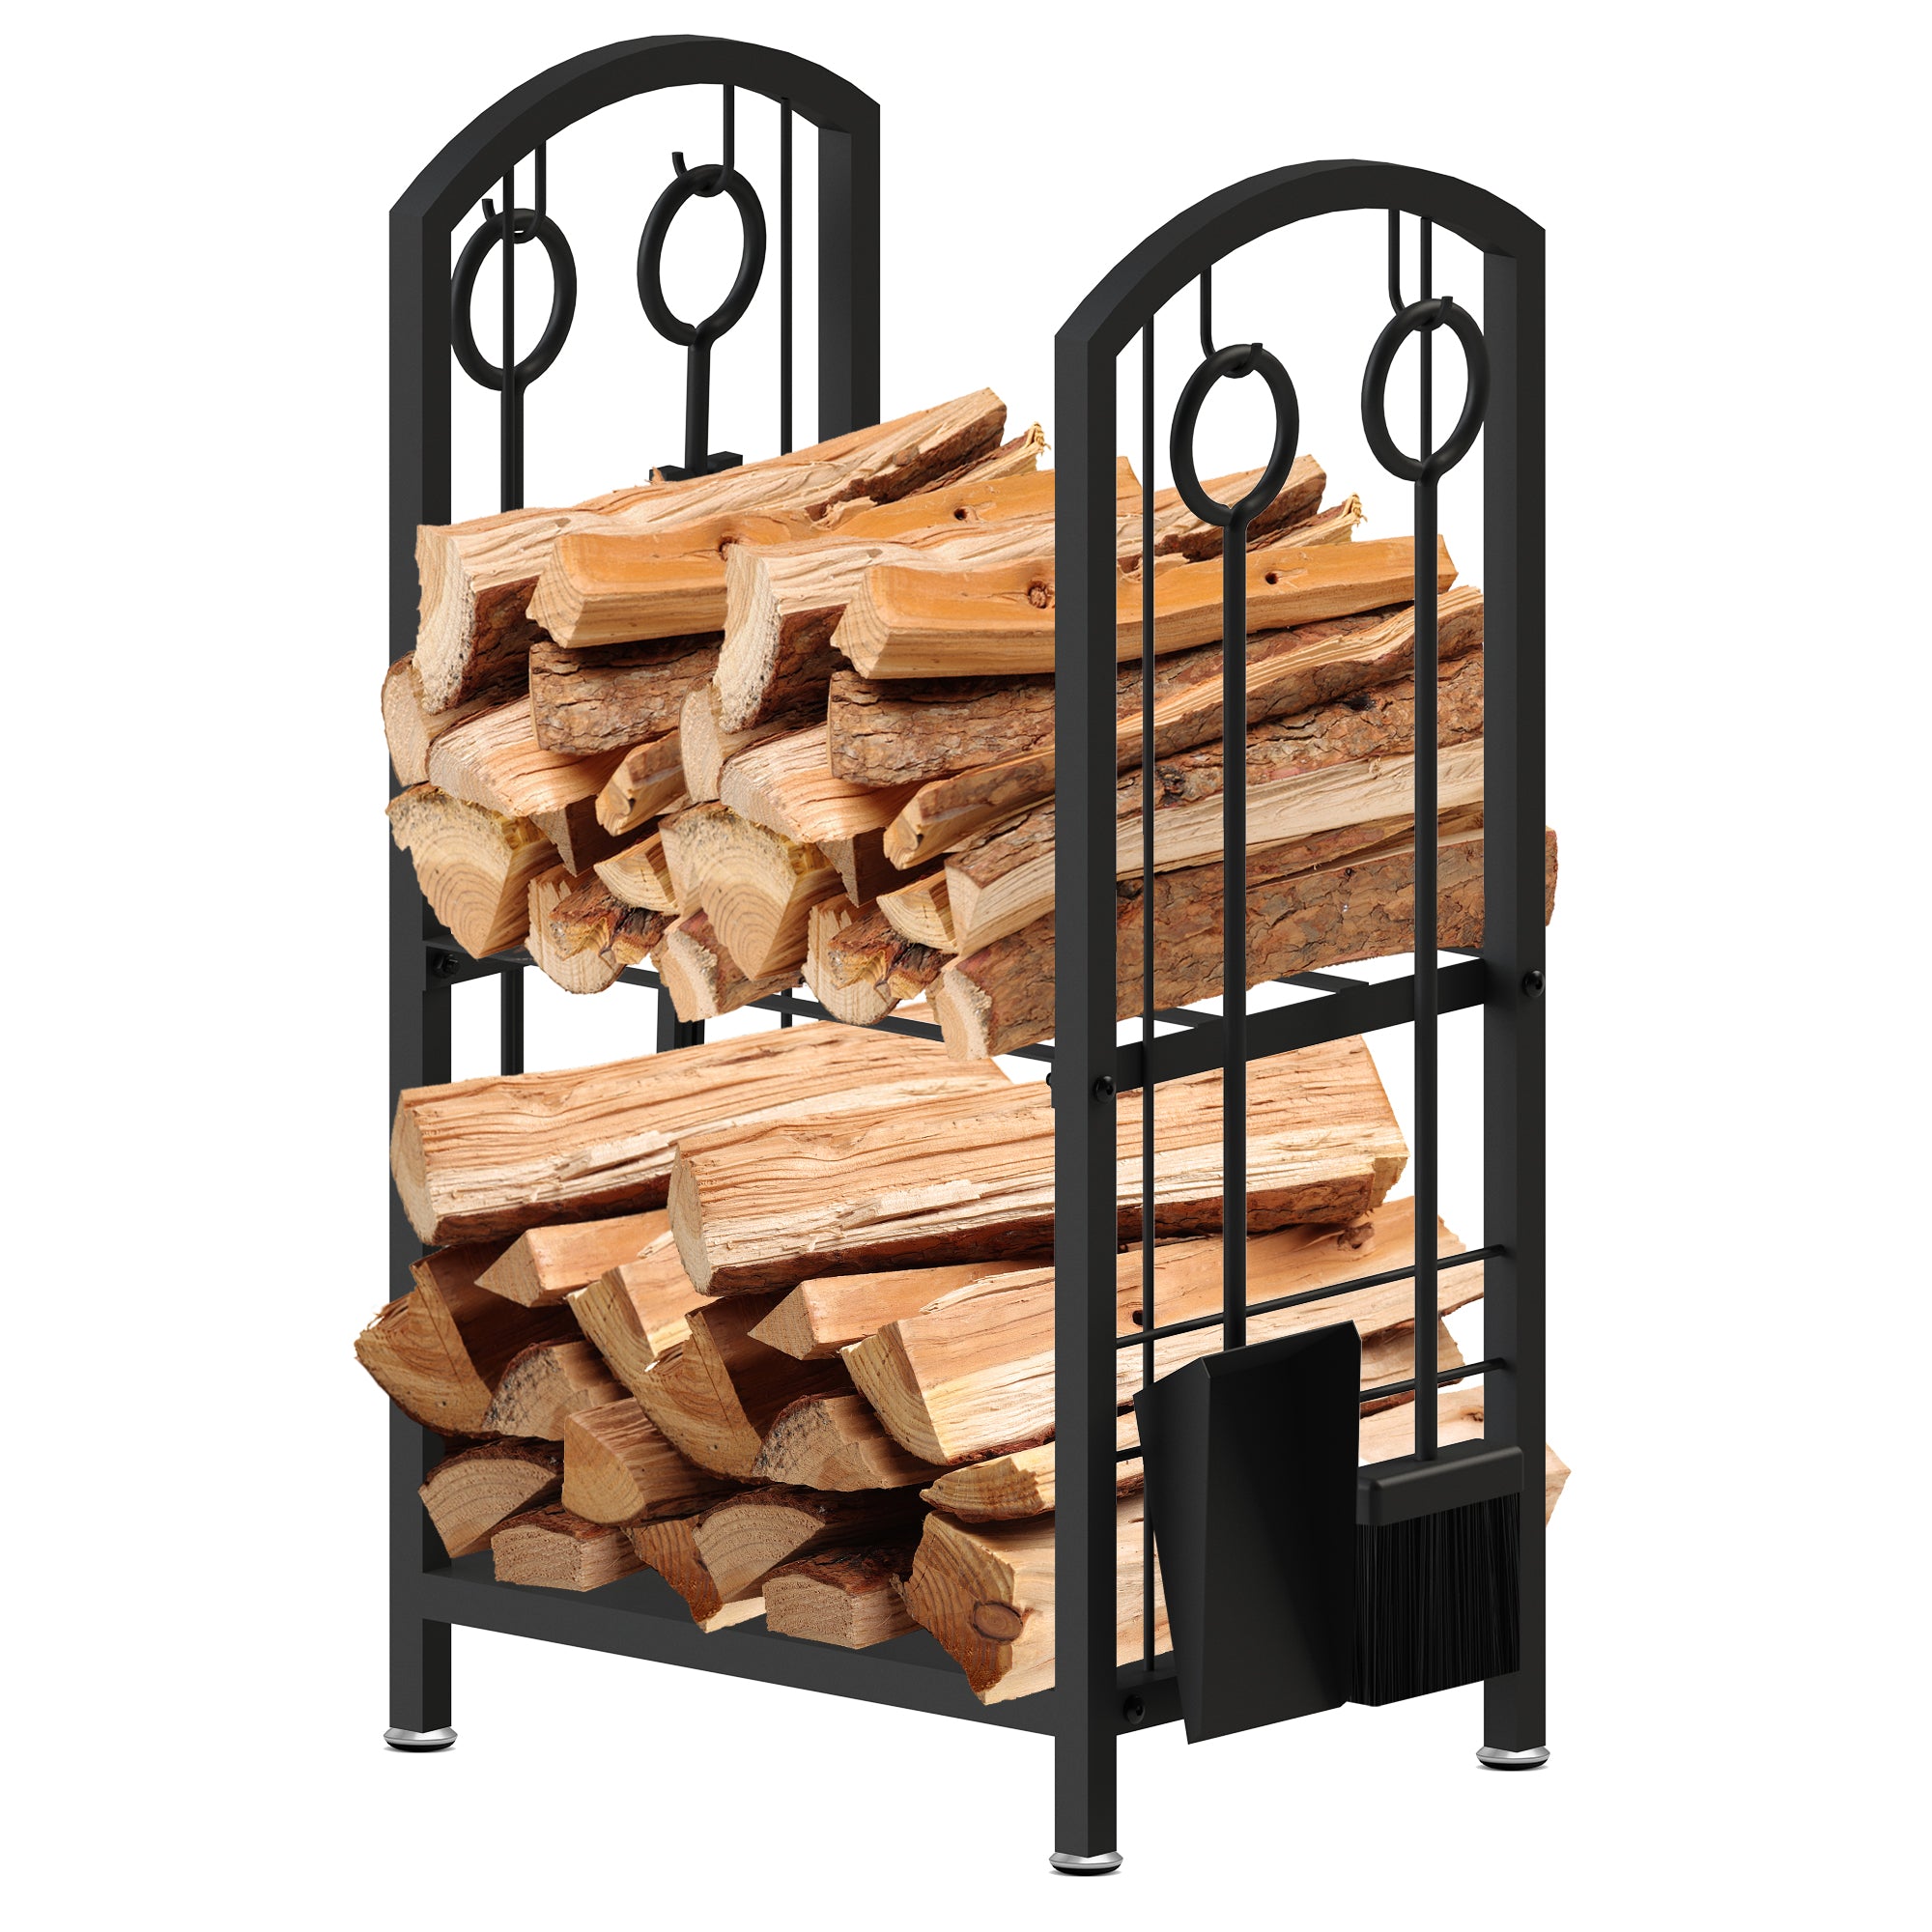 AMOS Firewood Stand Log Rack Holder with 4 Piece Fireplace Tools Set Black